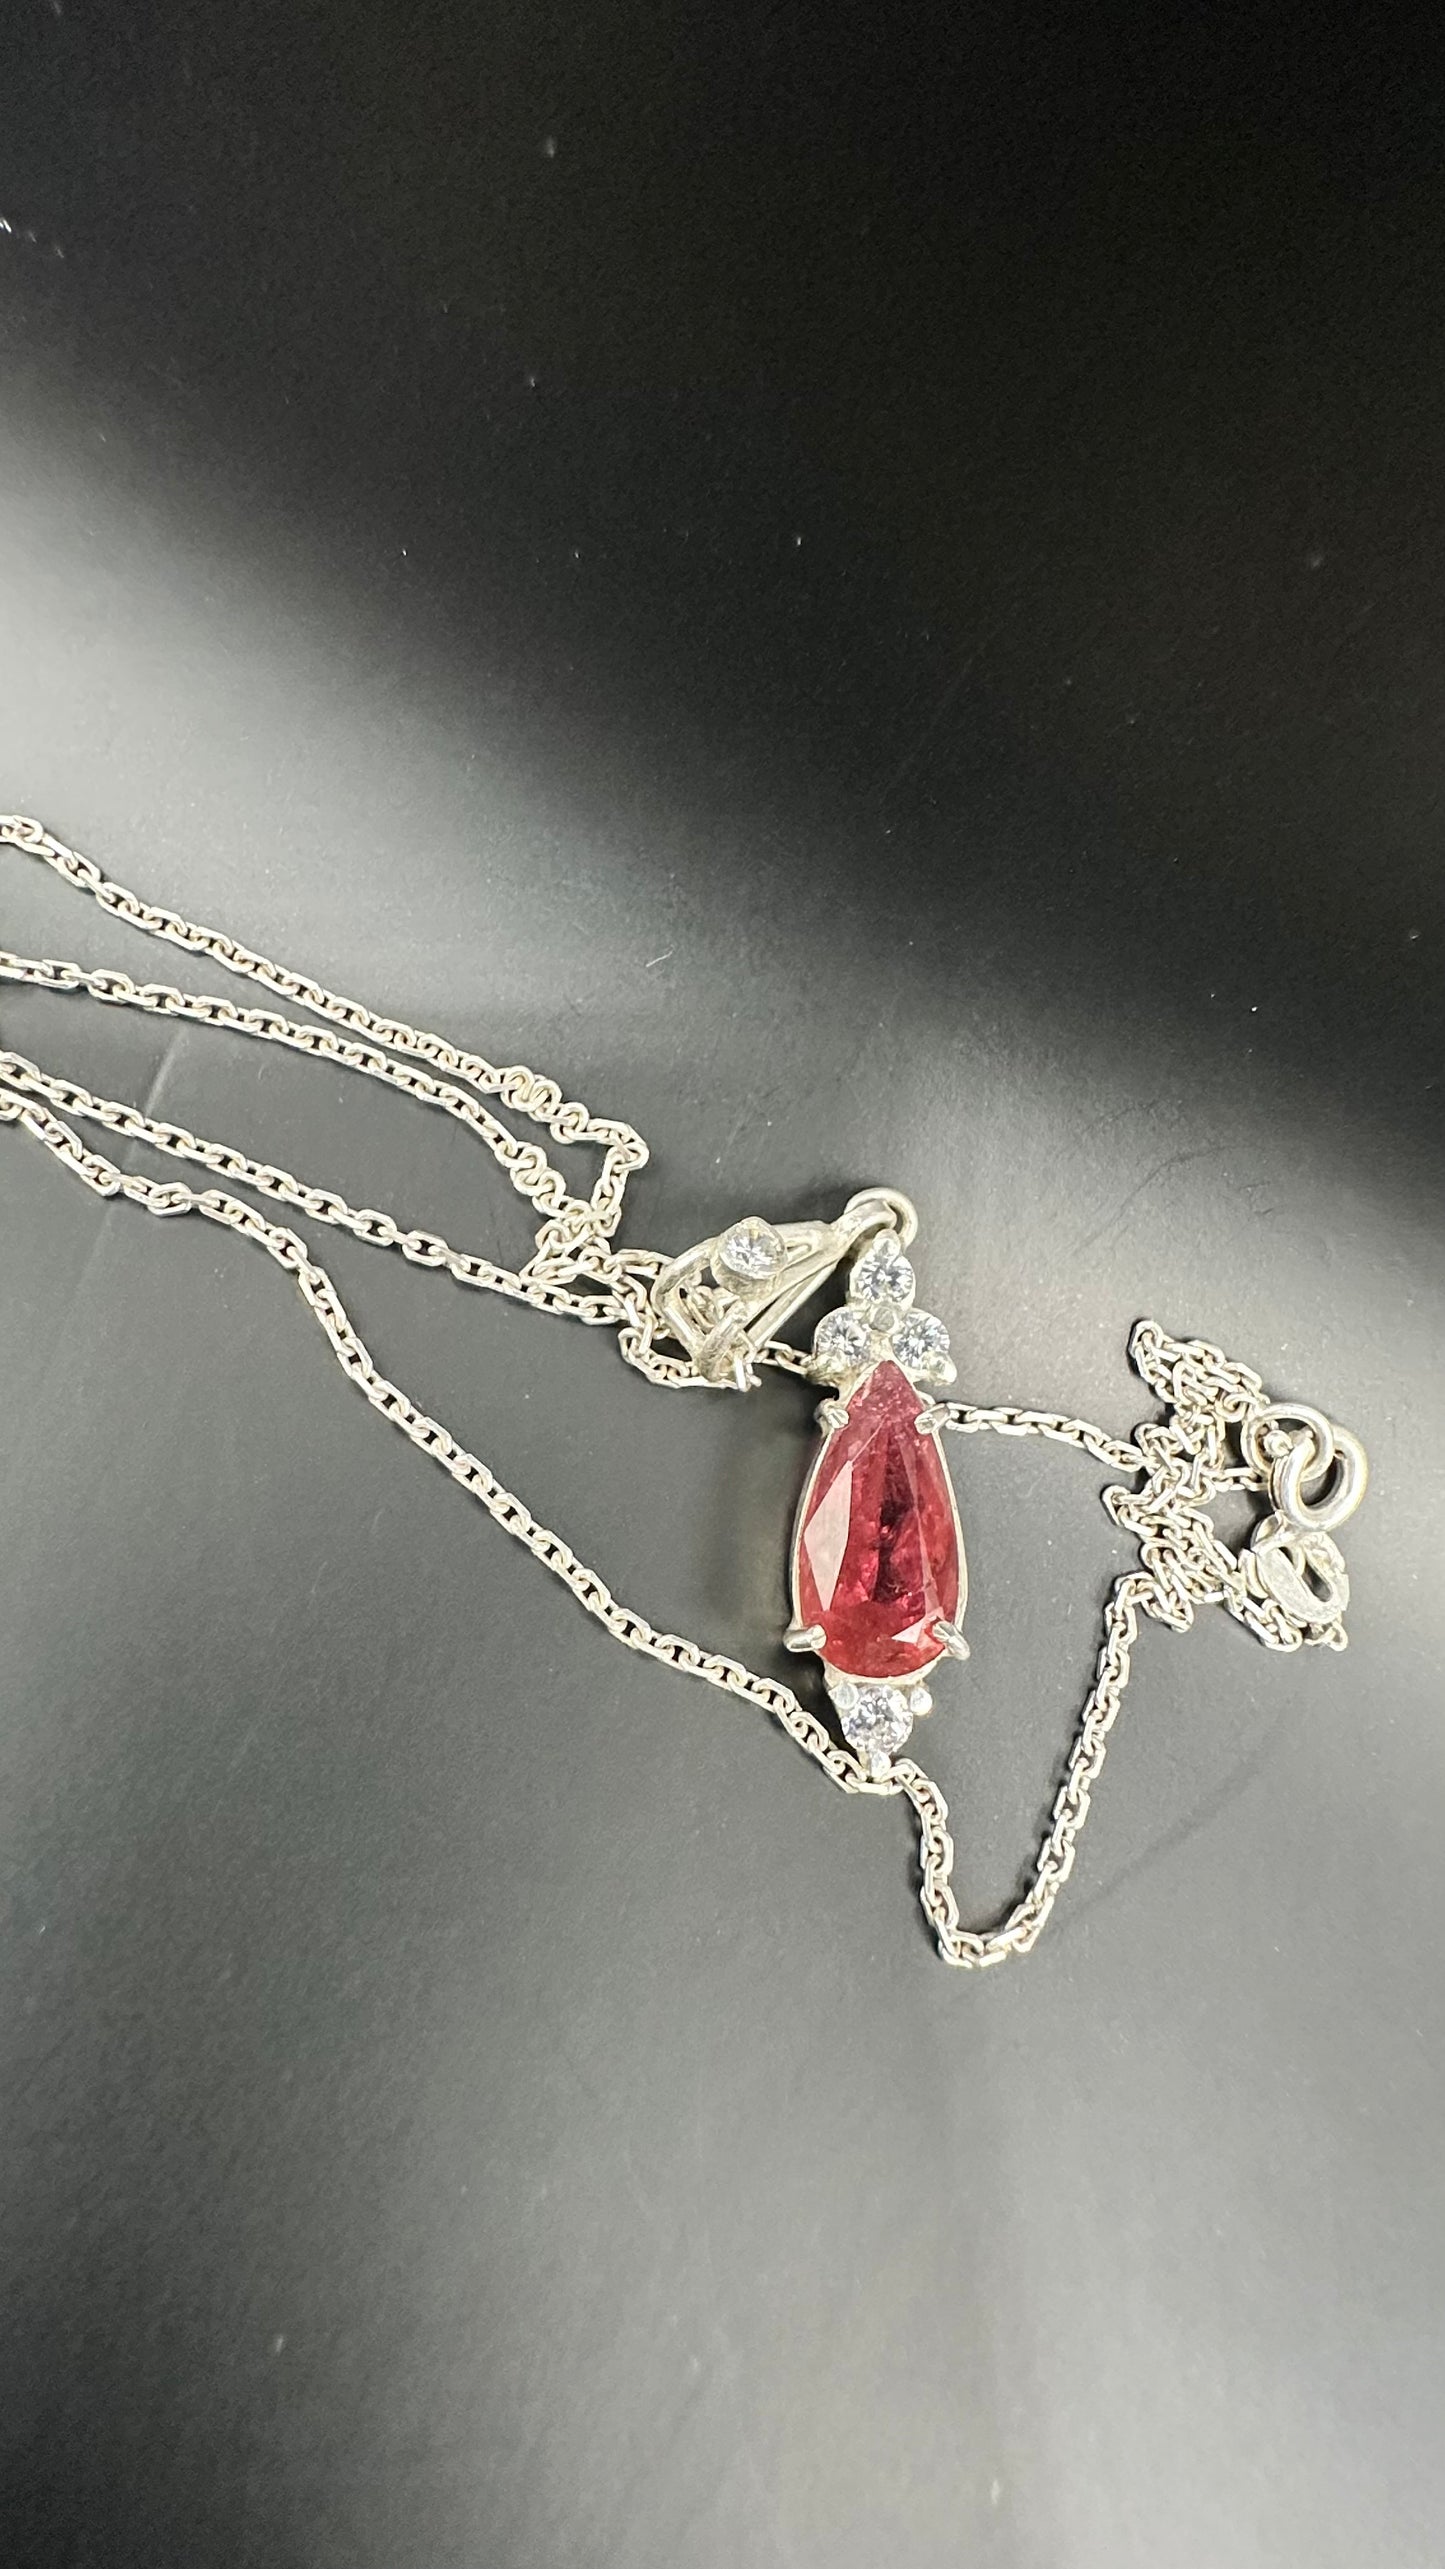 Silver sterling pendent with silver chain 100% original stone